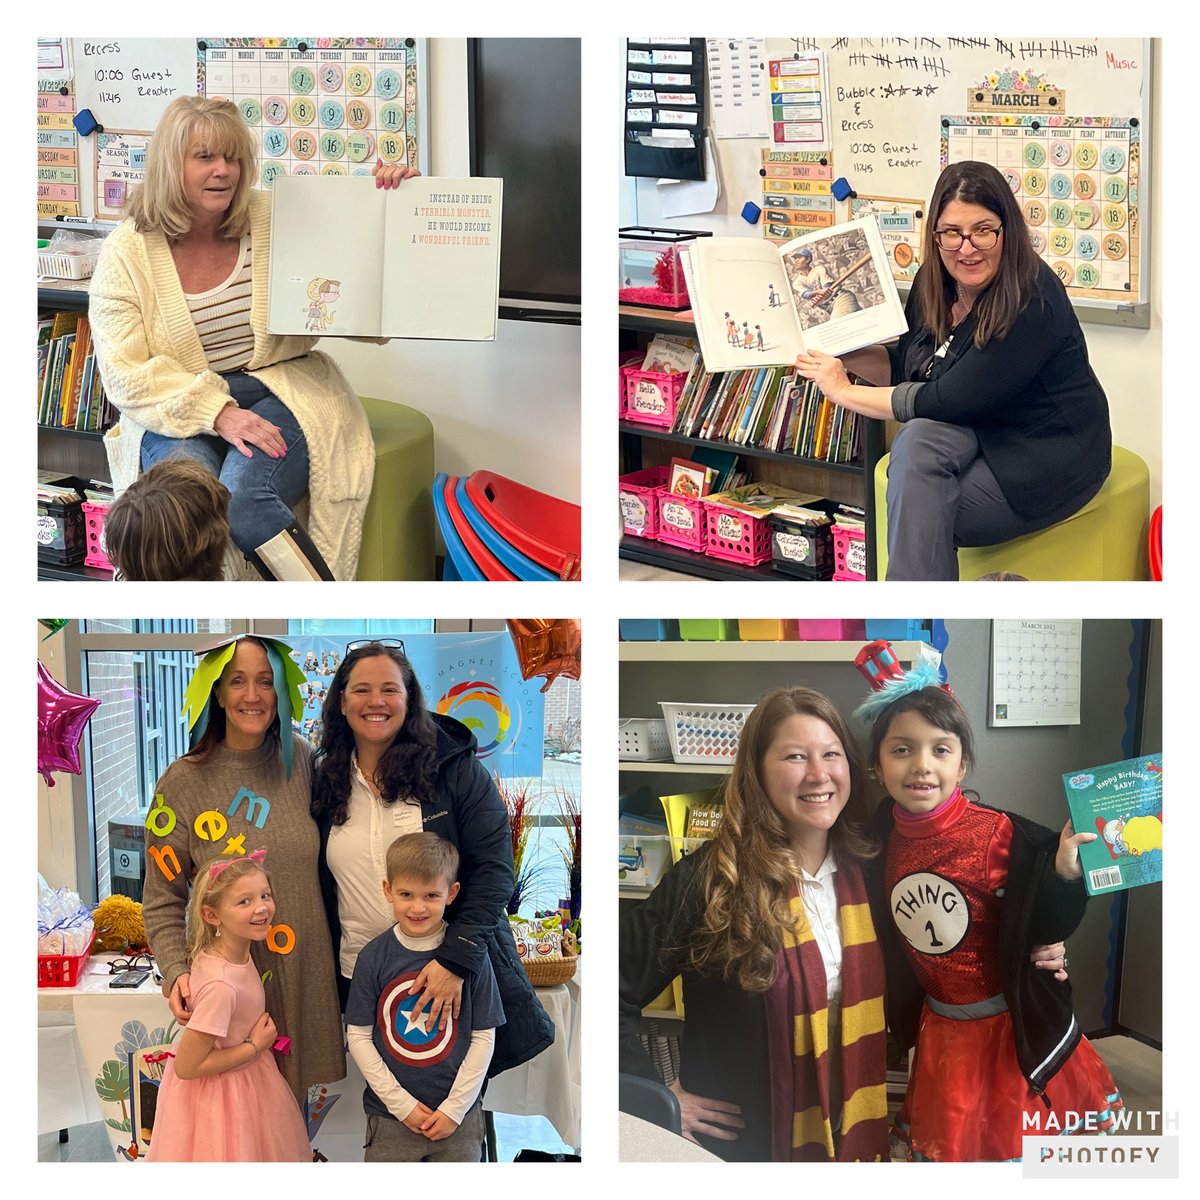 Best Day Ever! We celebrated Read Across America Day by dressing as our favorite book characters and having guest readers from our community 🌈📚❤️@NorwalkPS @CMSK8_CT @mrtprincipal @MrsABeratis @LaurenFabrizi @NPDCSLT @McbrydeDr #ReadAcrossAmericaDay #hogwartsforthewin